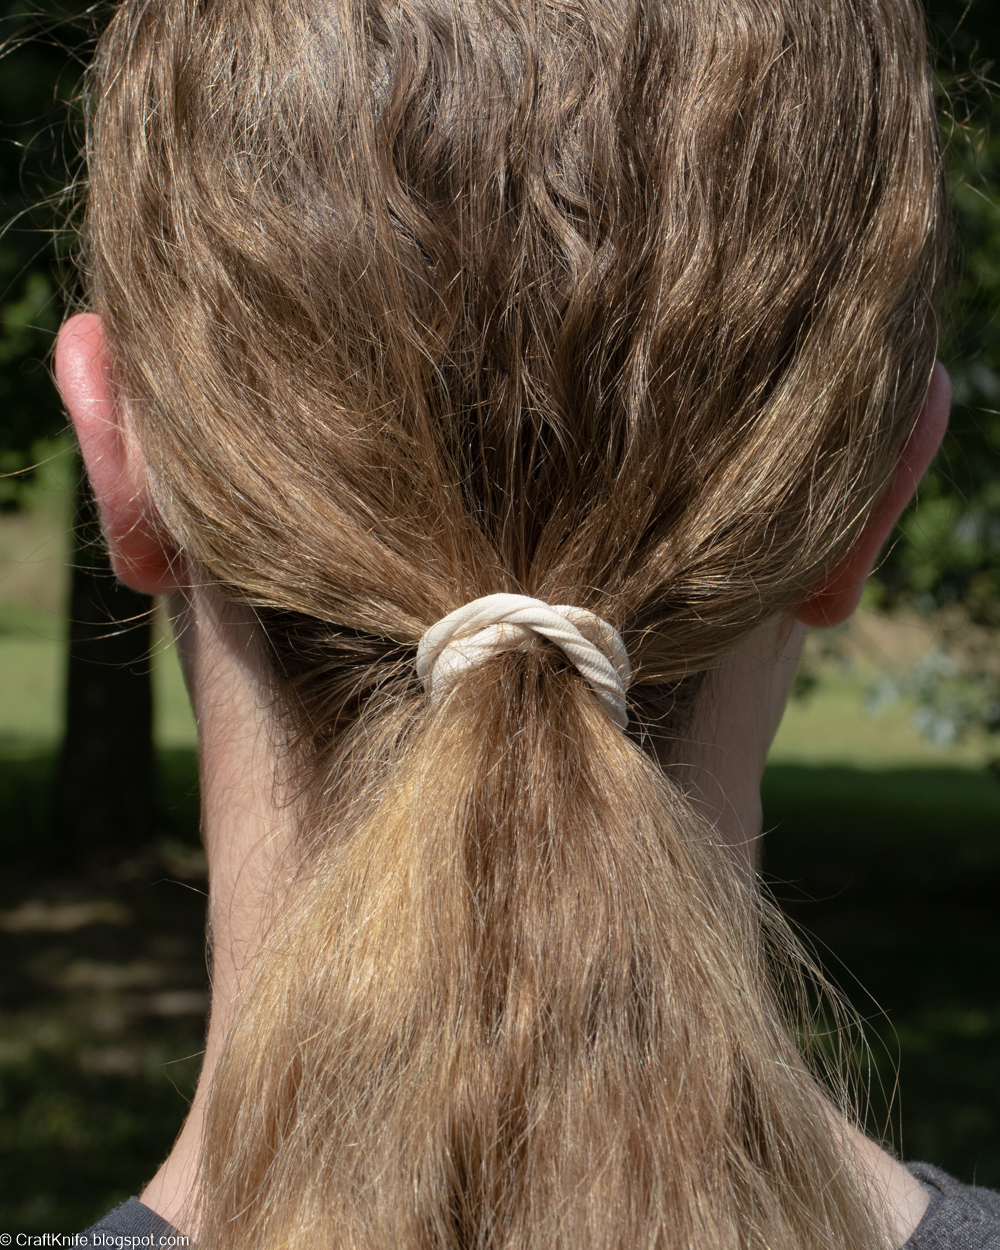 20 DIY Hair Accessories to Make from Materials You Already Own